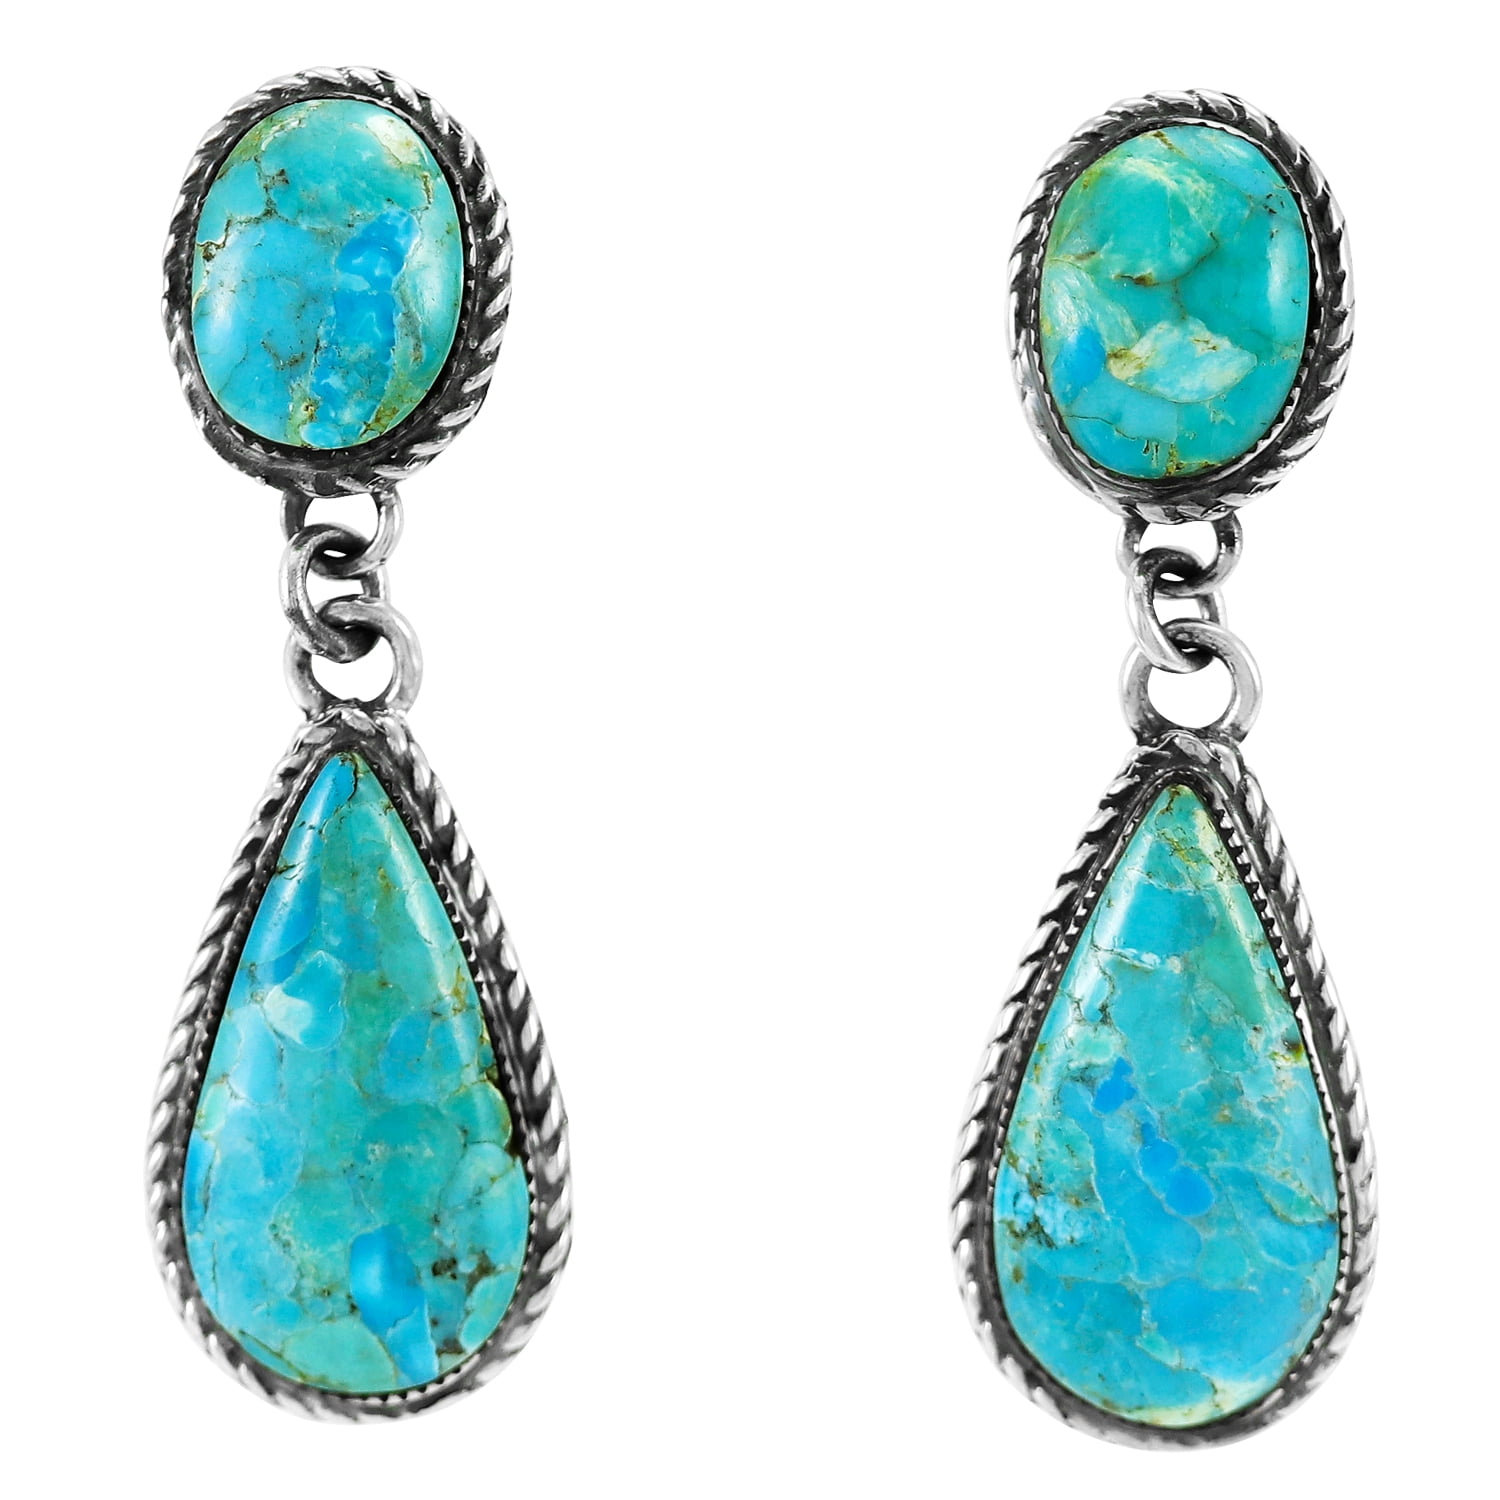 Turquoise Jewelry Earrings for Women Sterling Silver 925 | Turquoise ...